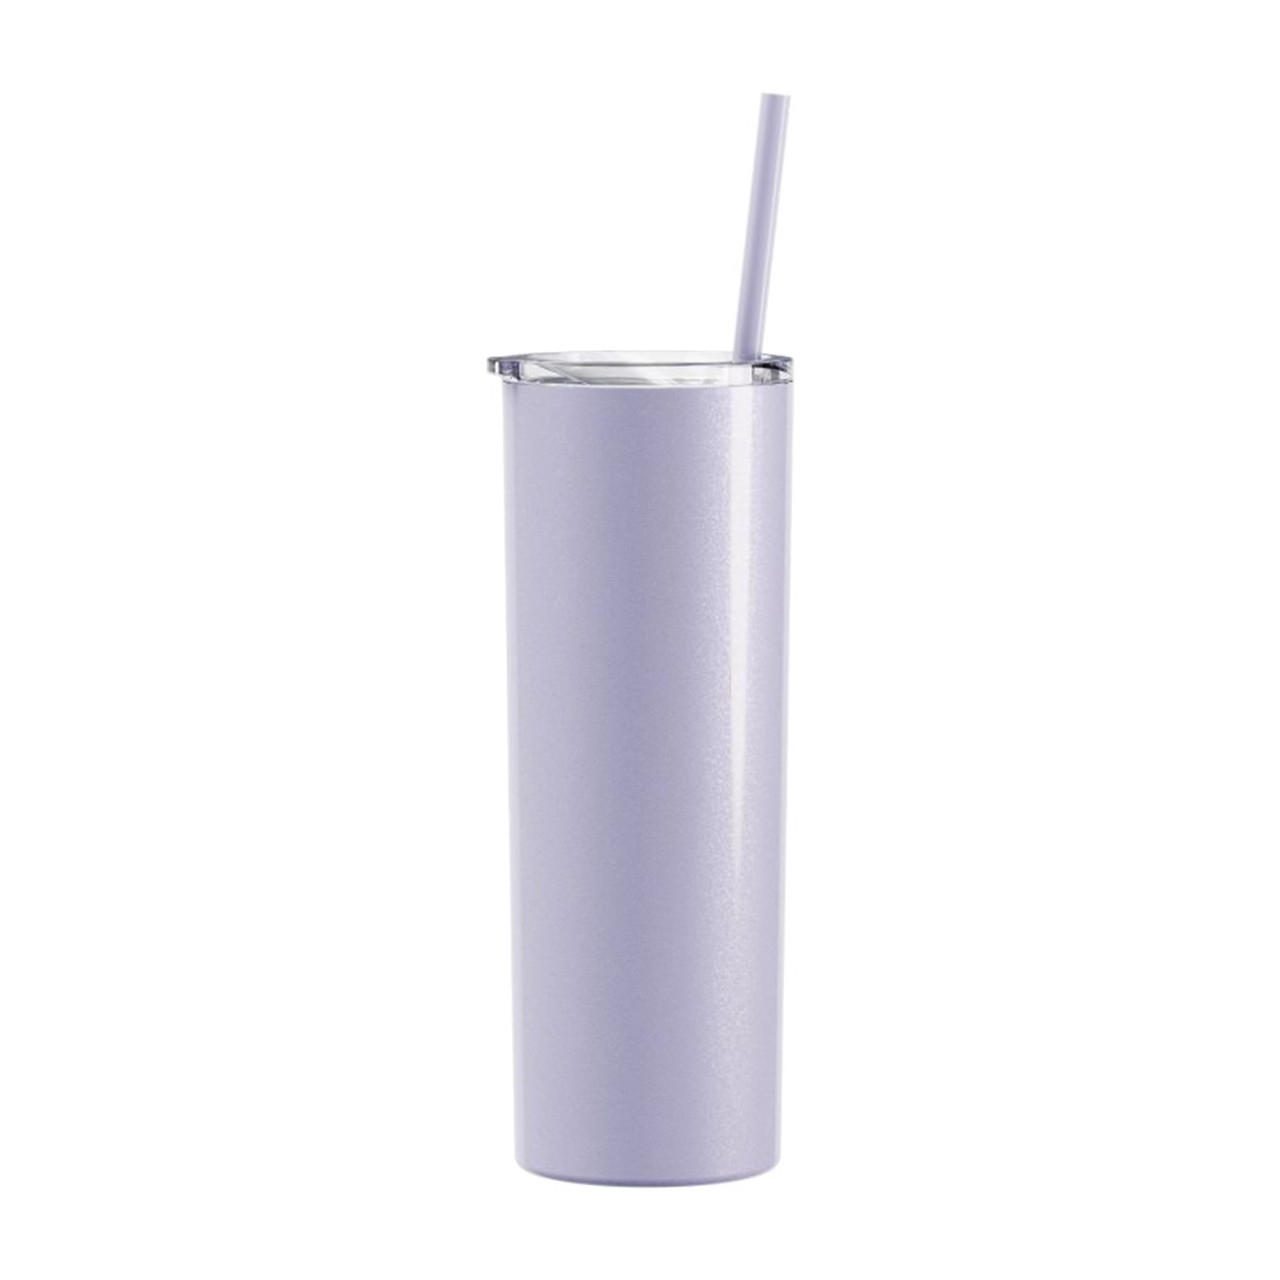 Stainless Steel Fabric Purse Tumbler